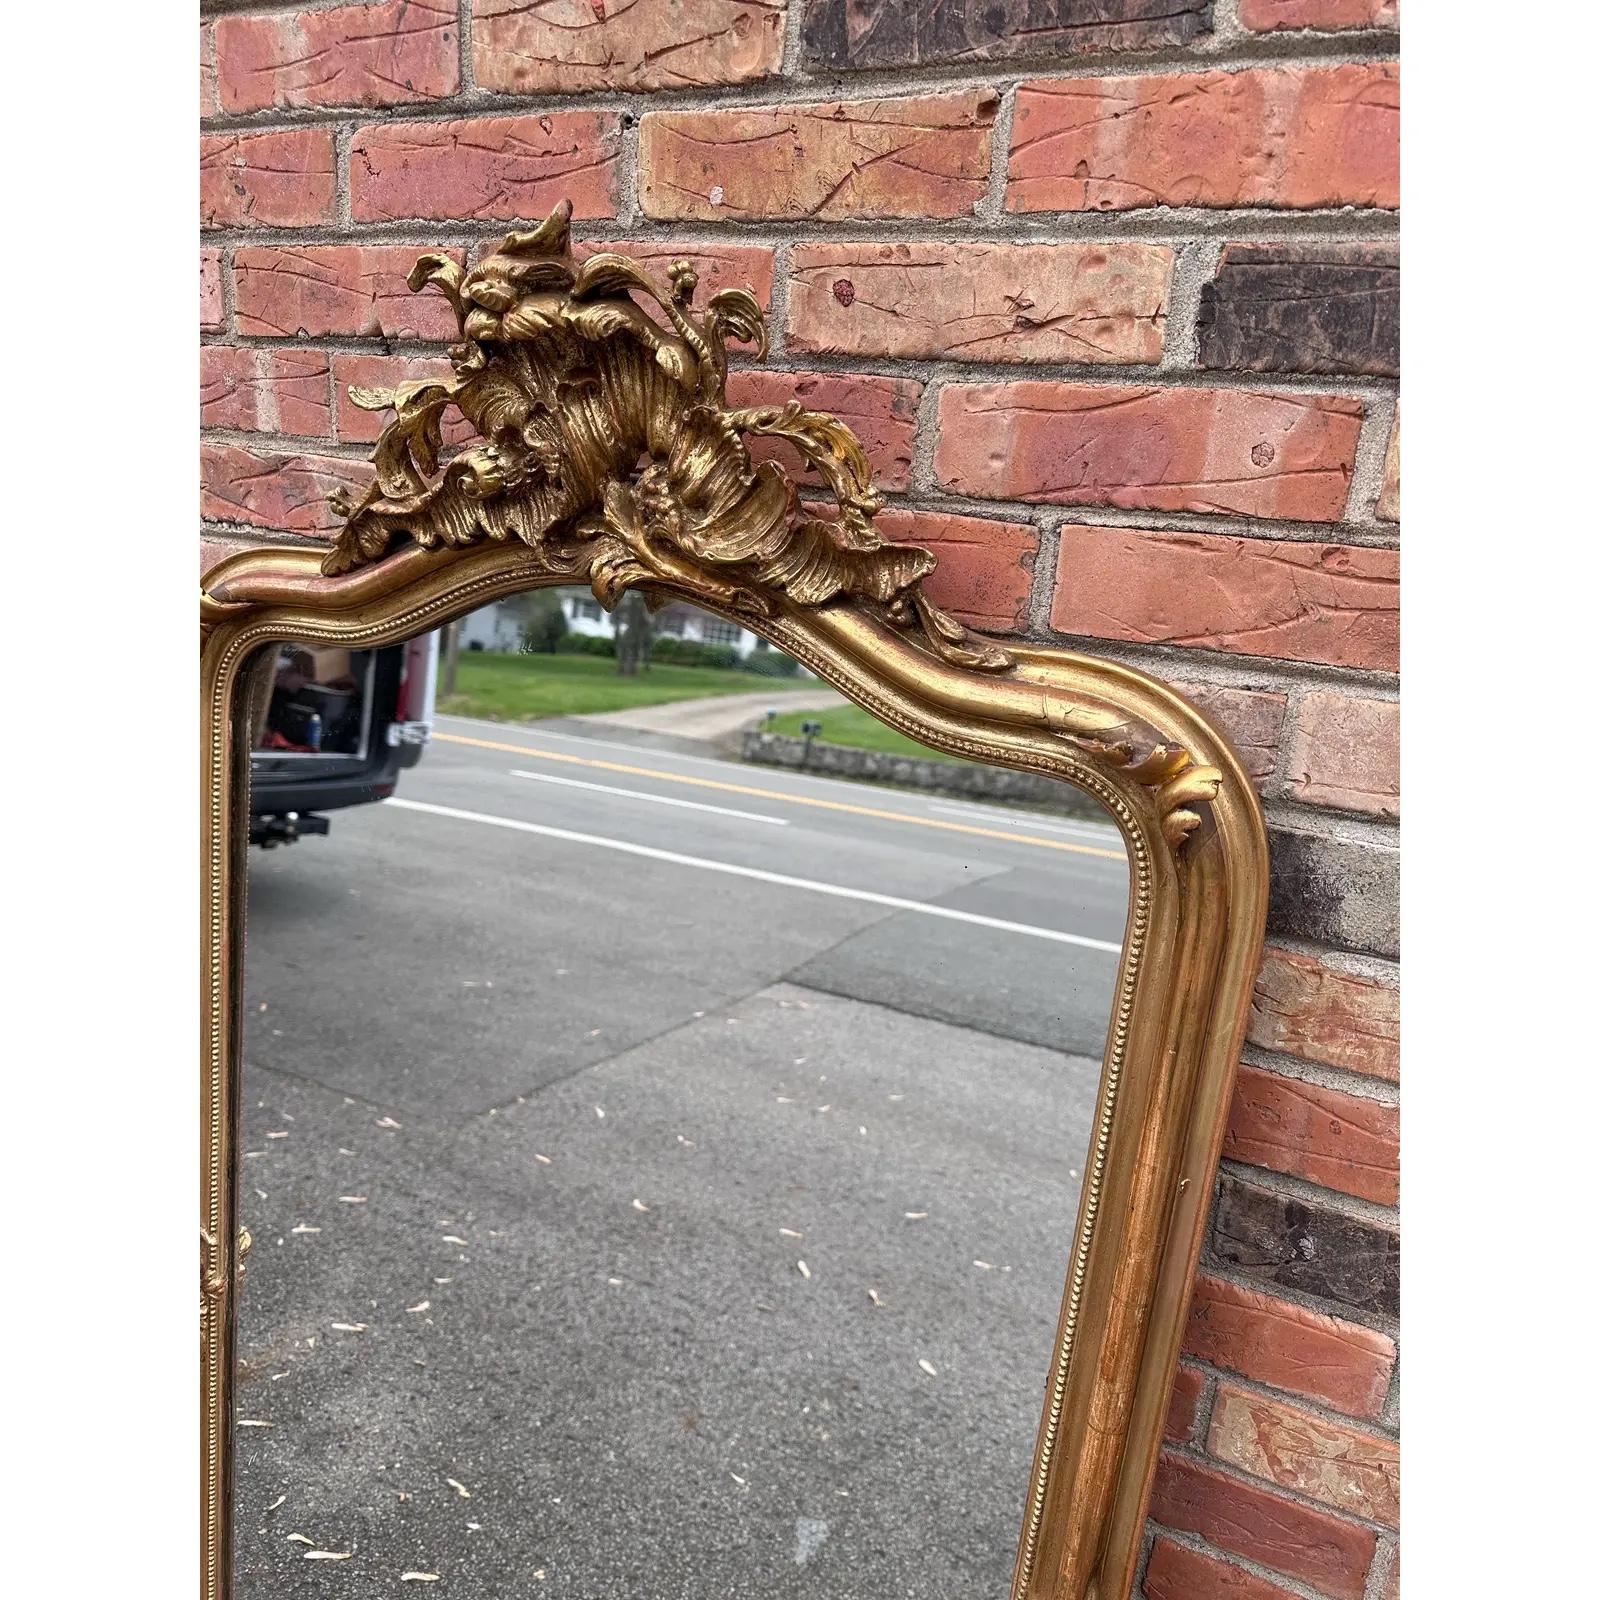 This 19th Century French mirror is top of its class! With its stunning gilded adornments such as its hand carved edging, ornate cartouche, and oversized silhouette, this mirror is bound to make a grand impression in any space. It has all of its